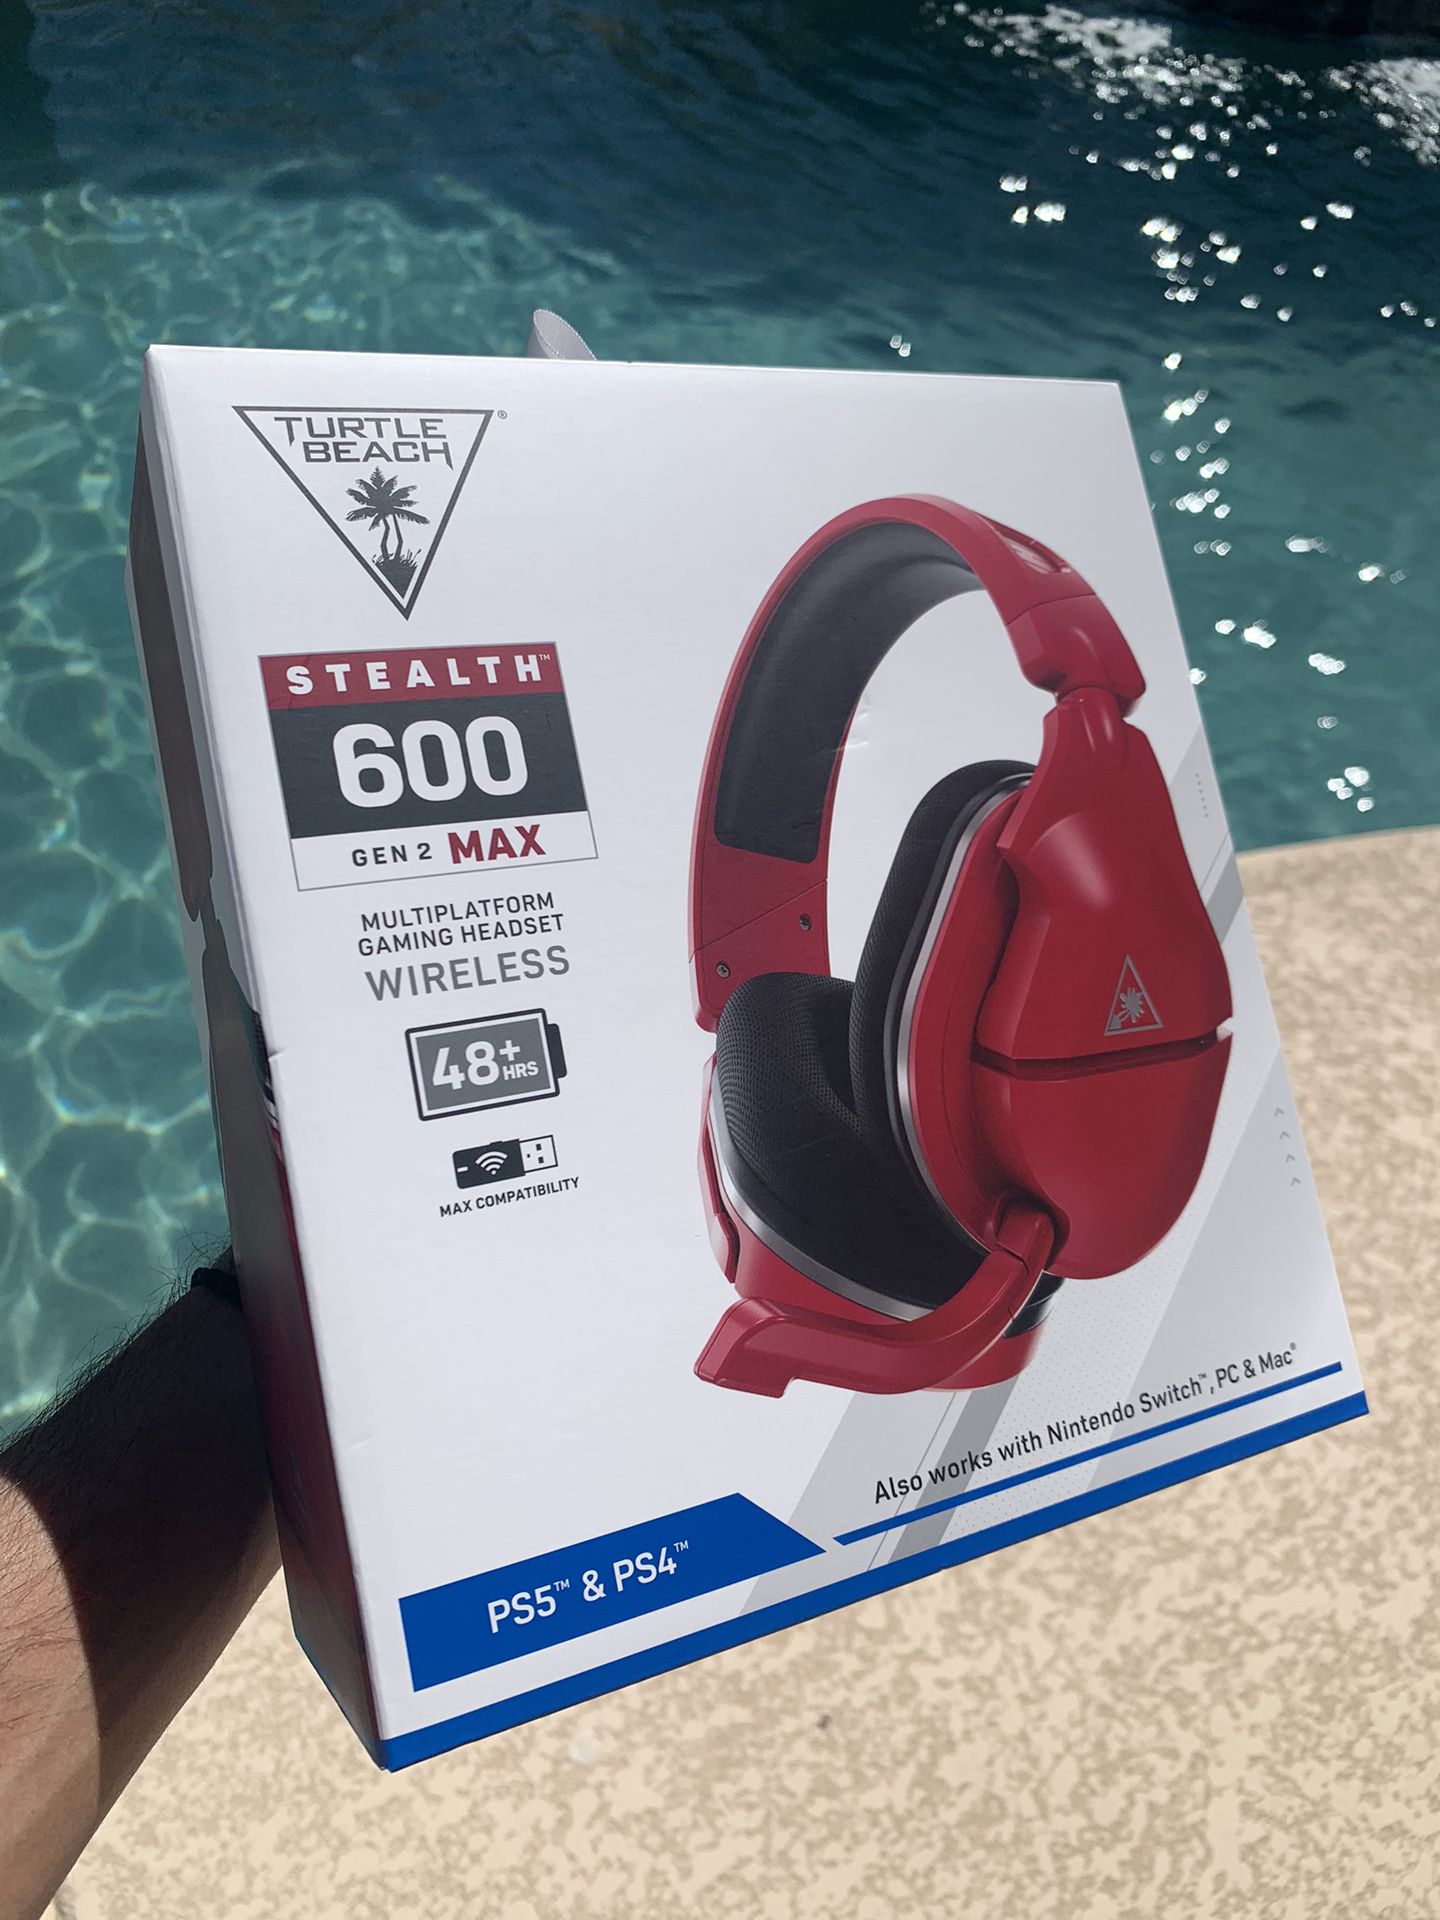 Turtle Beach Stealth 600 Gen 2 MAX Wireless Gaming Headset for PlayStation 4/5/Nintendo Switch/PC - Midnight Red